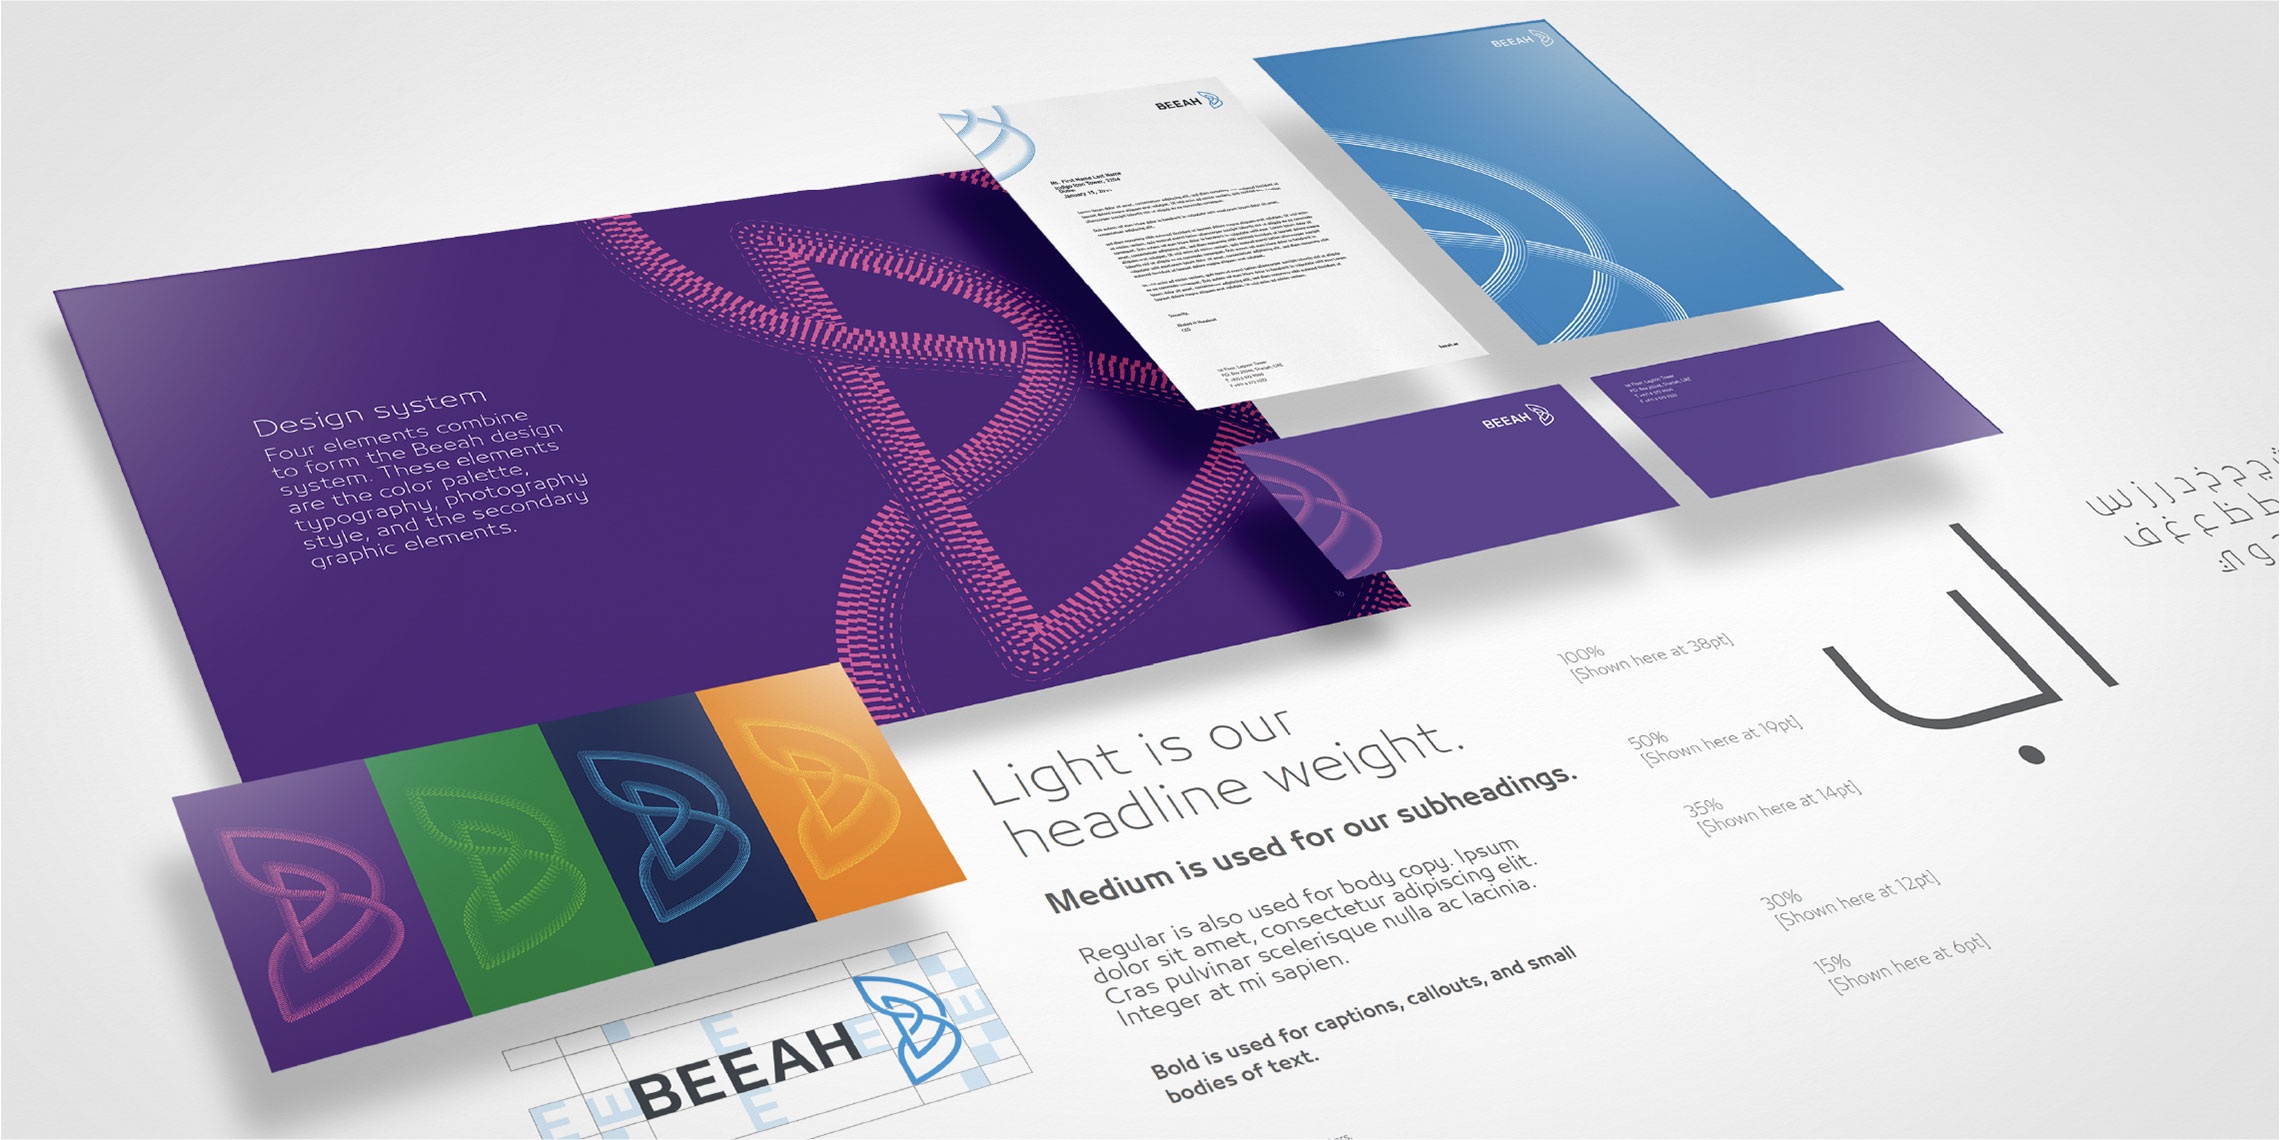 The design system developed for Beeah, showing different applications for printed materials